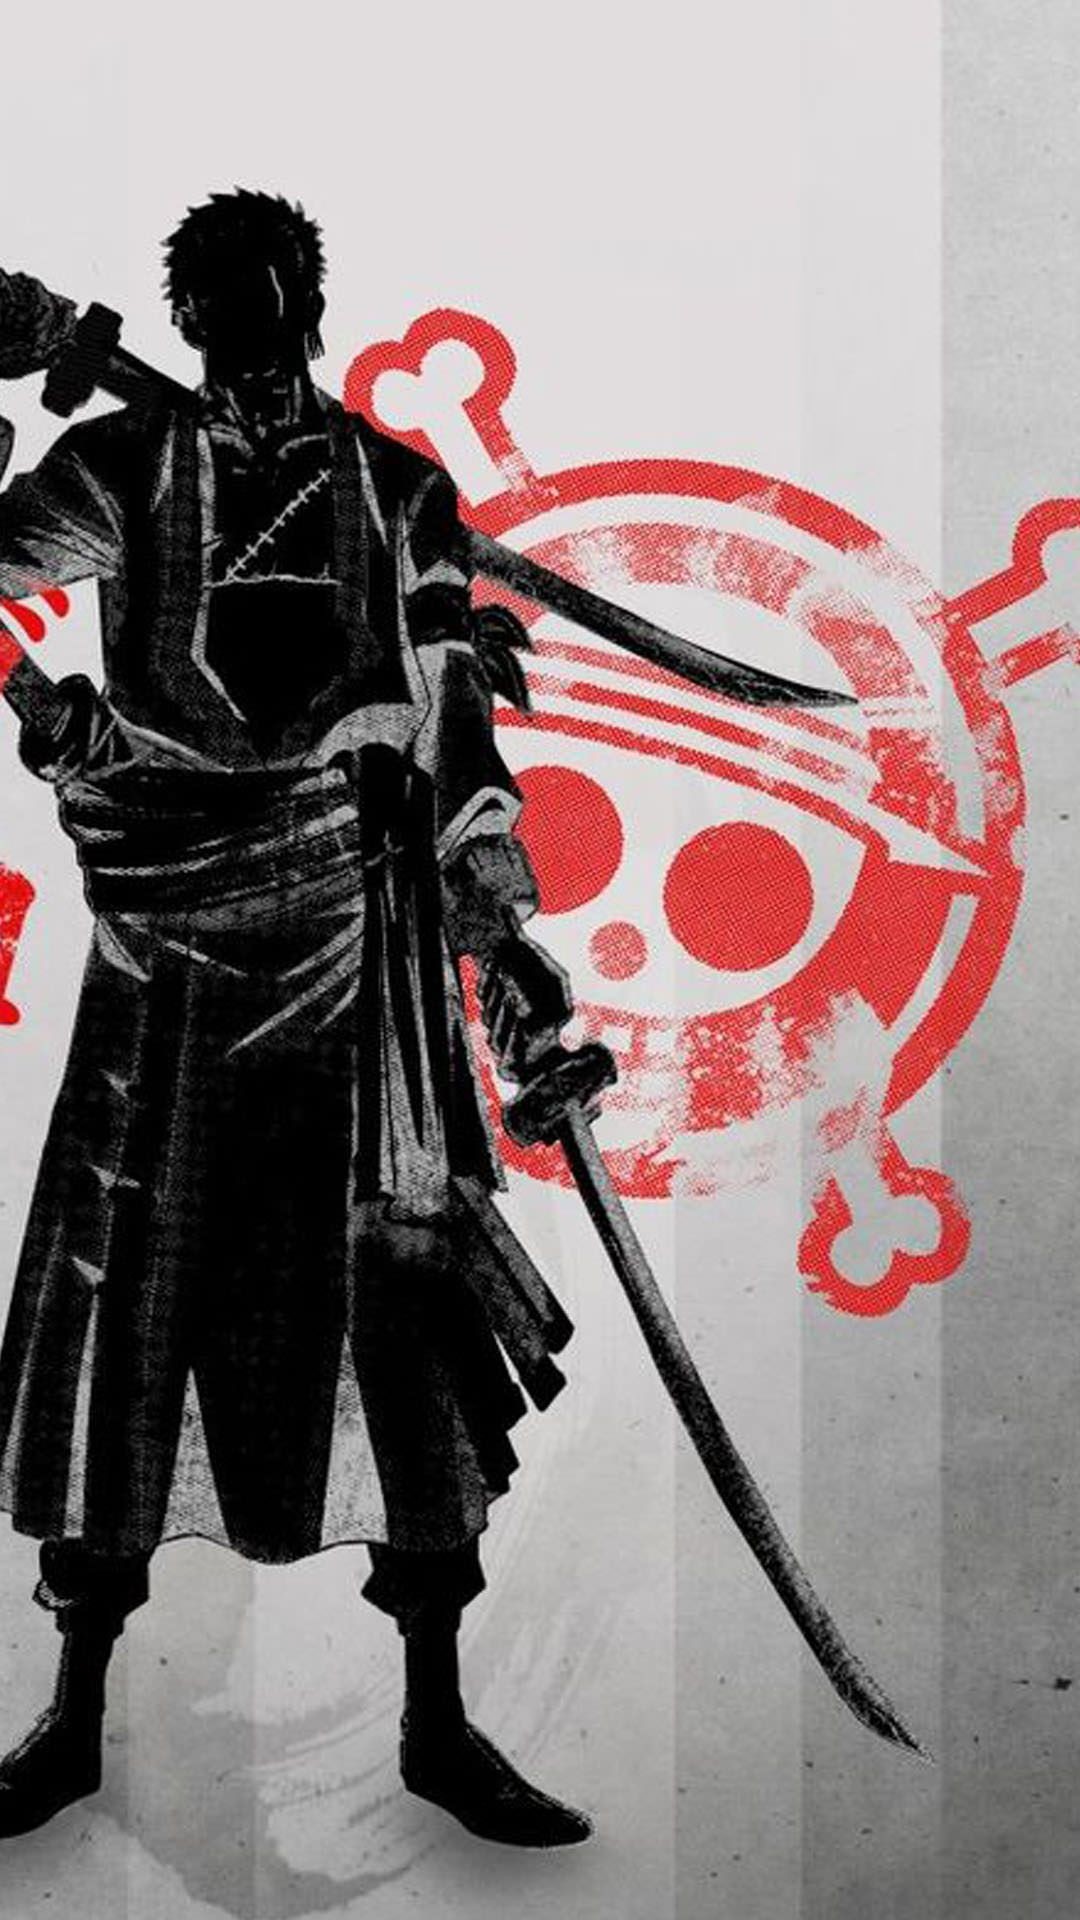 Epic Zorro Wallpaper - Epic Zoro Wallpaper (77+ images) / You can also